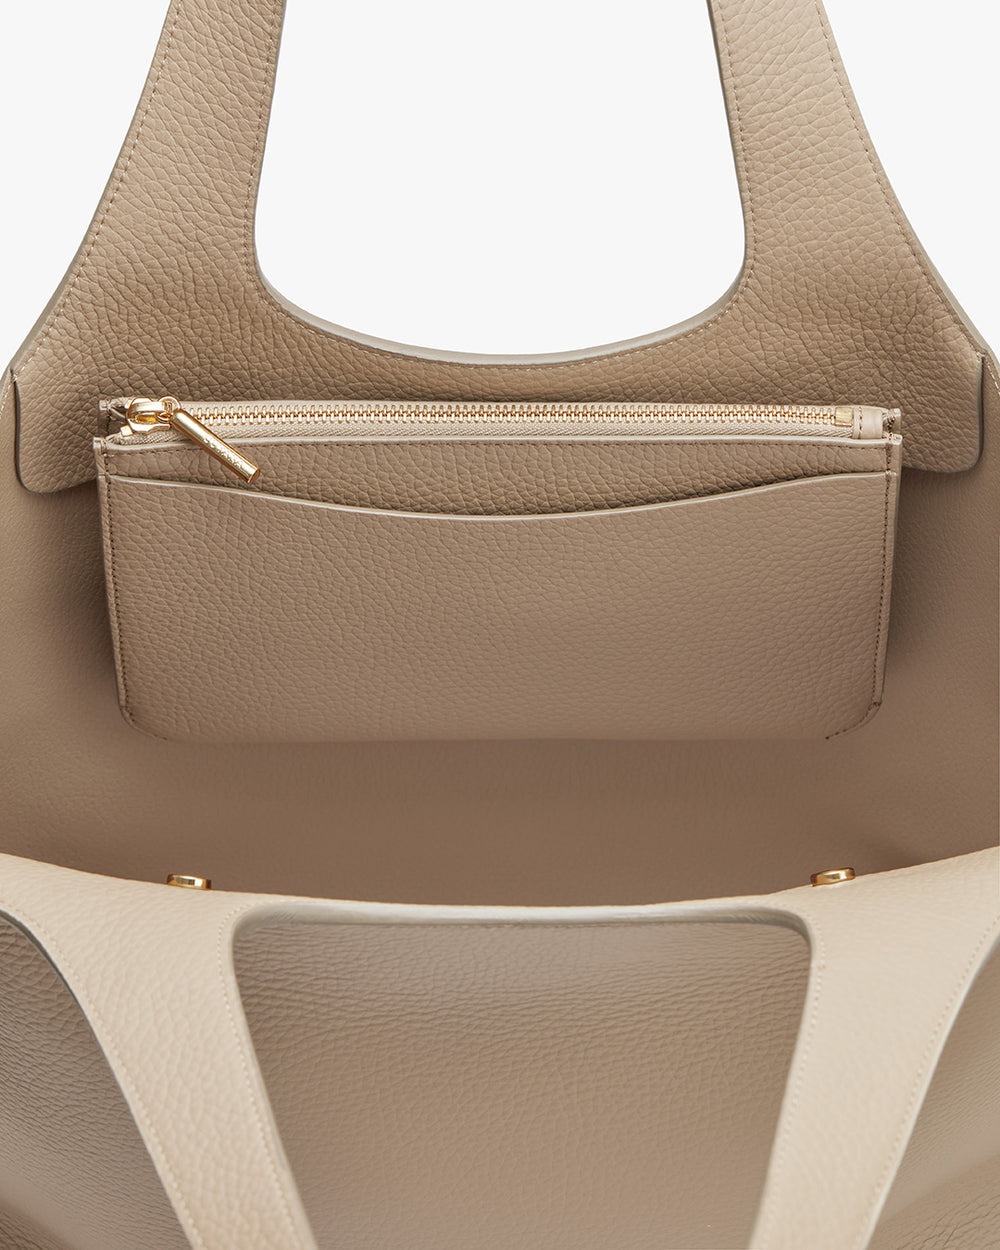 Two beige handbags with handles, one featuring a zipper compartment.